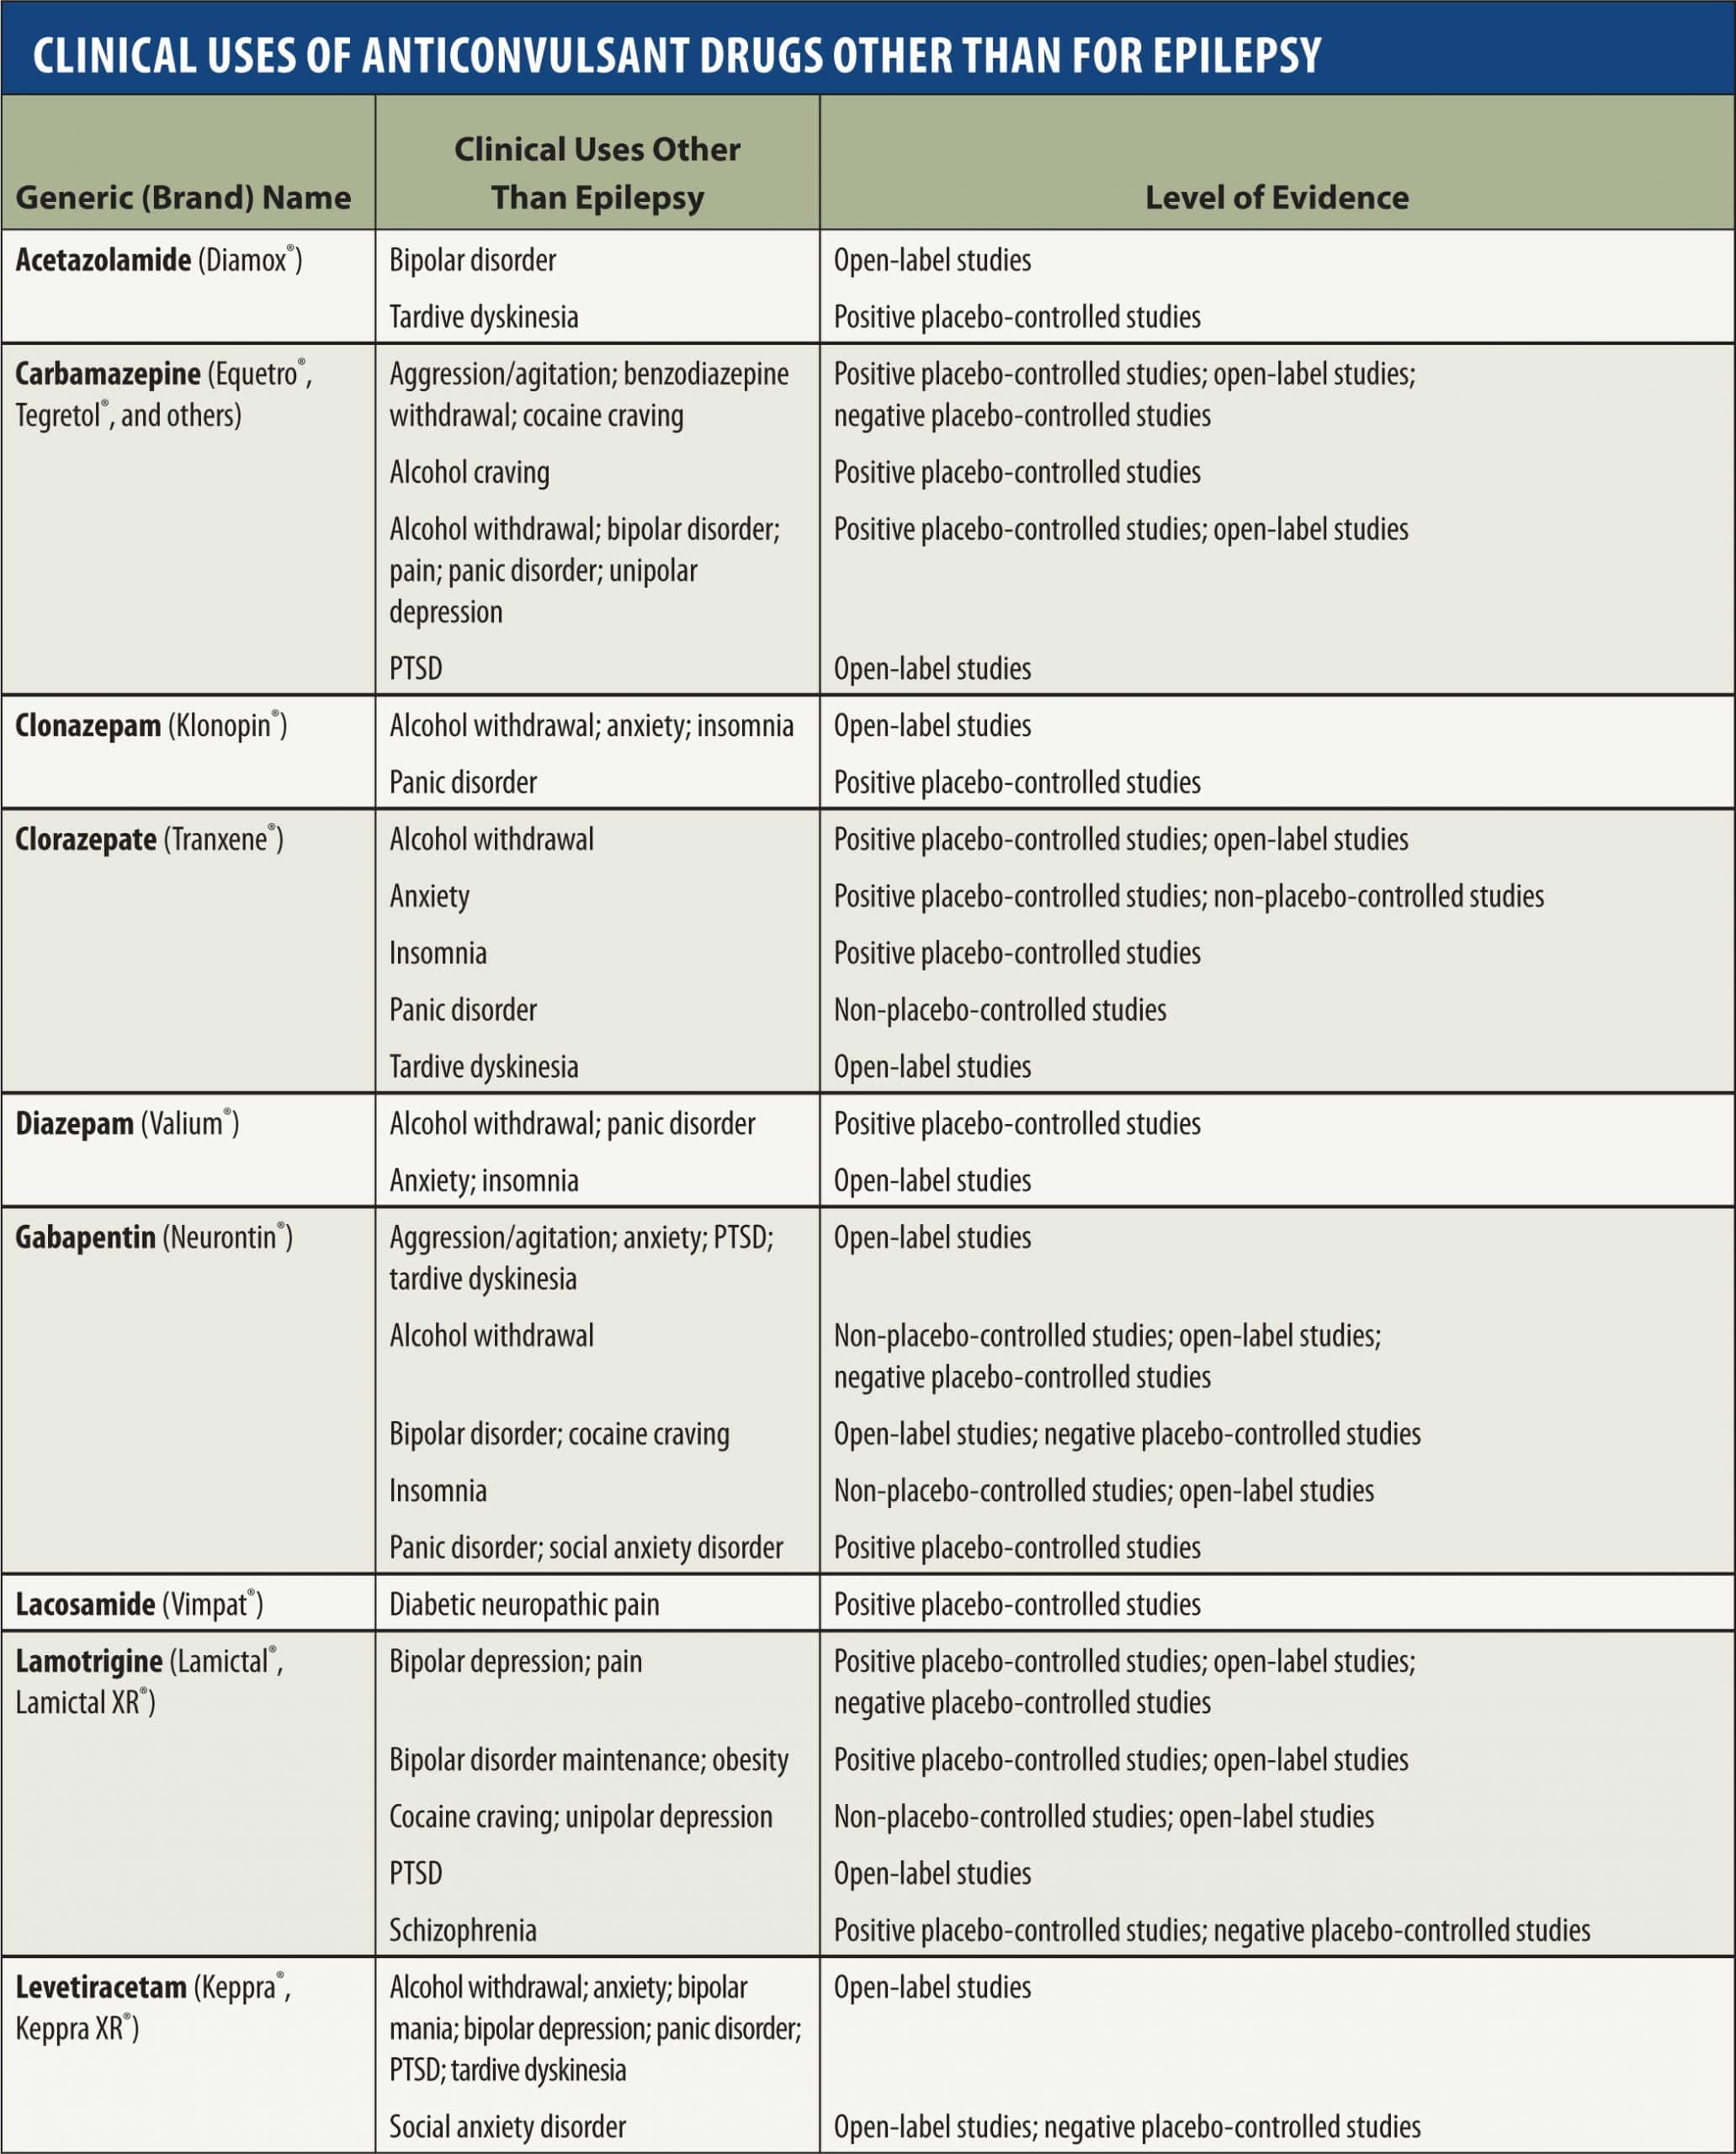 Clinical Uses of Anticonvulsant Drugs Other Than for Epilepsy